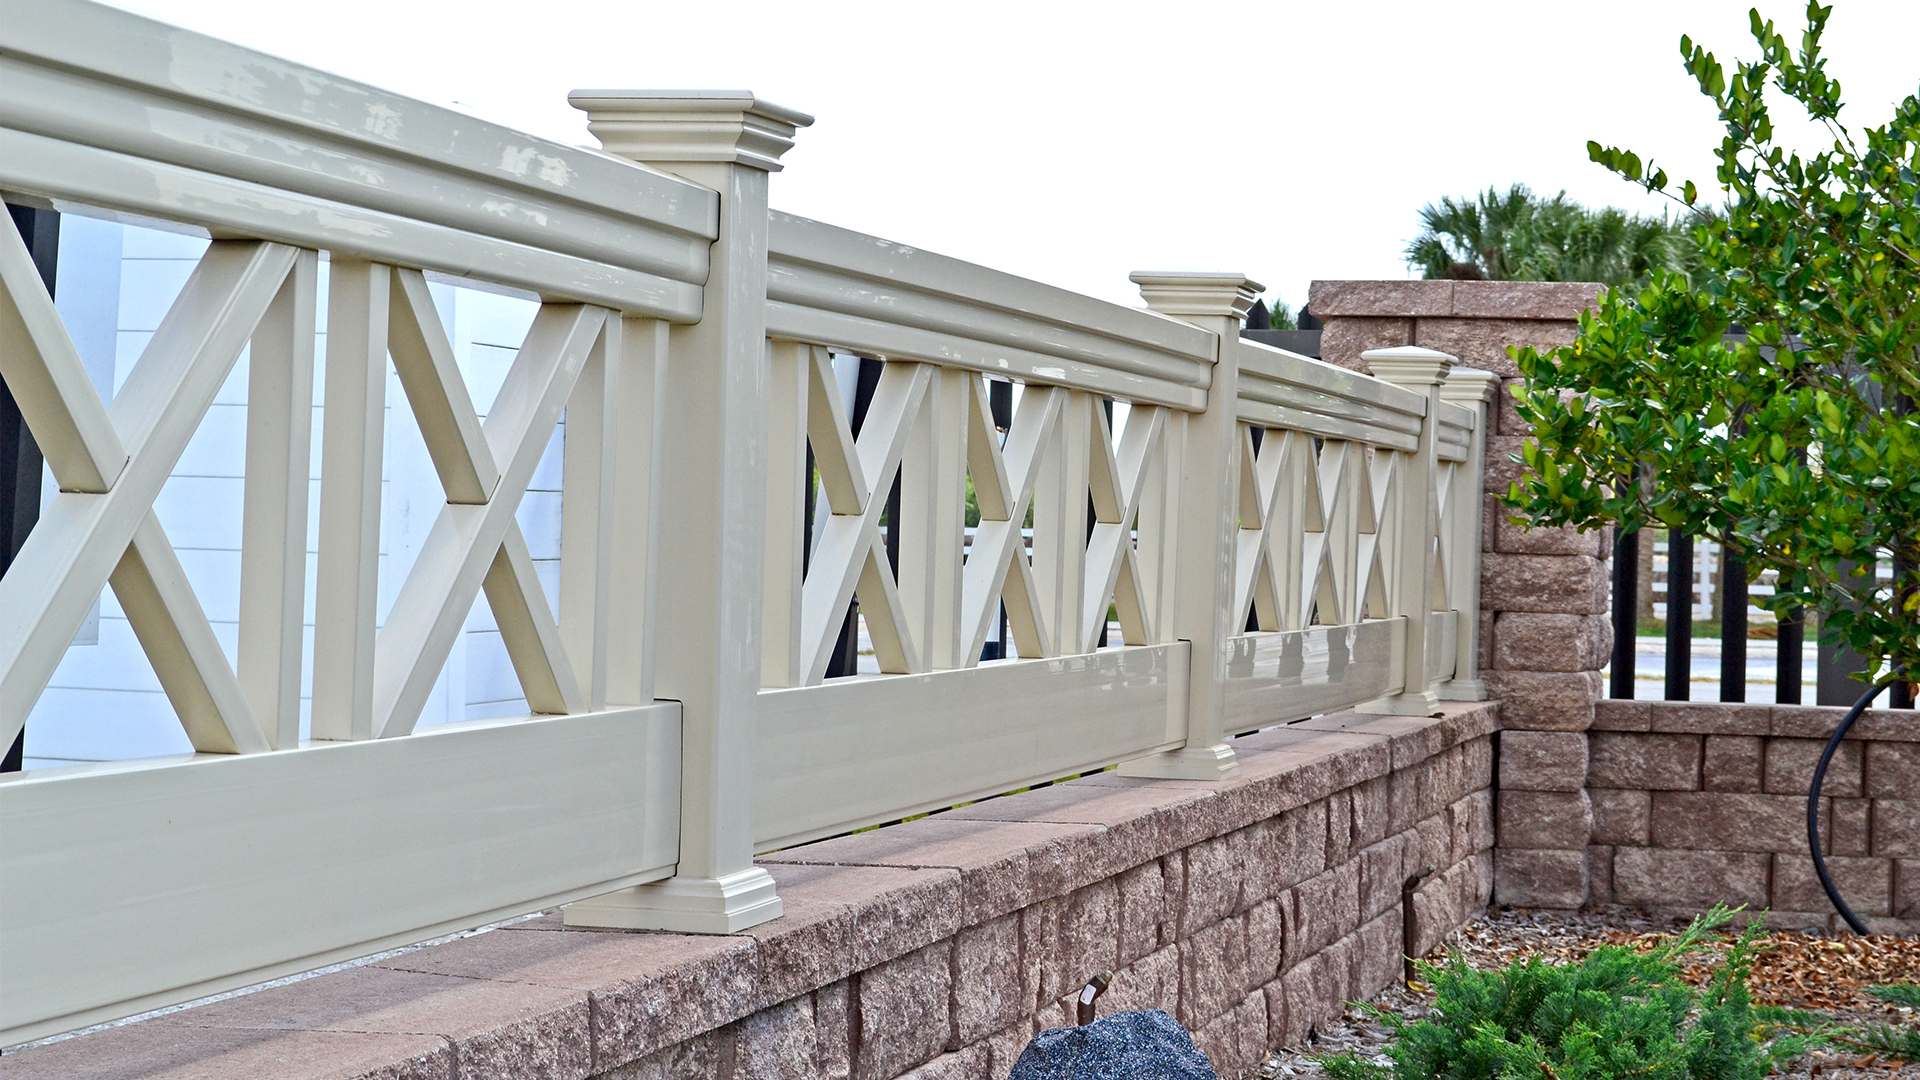 Danielle Fence & Outdoor Living | Danielle Fence Showroom - PVC Wall